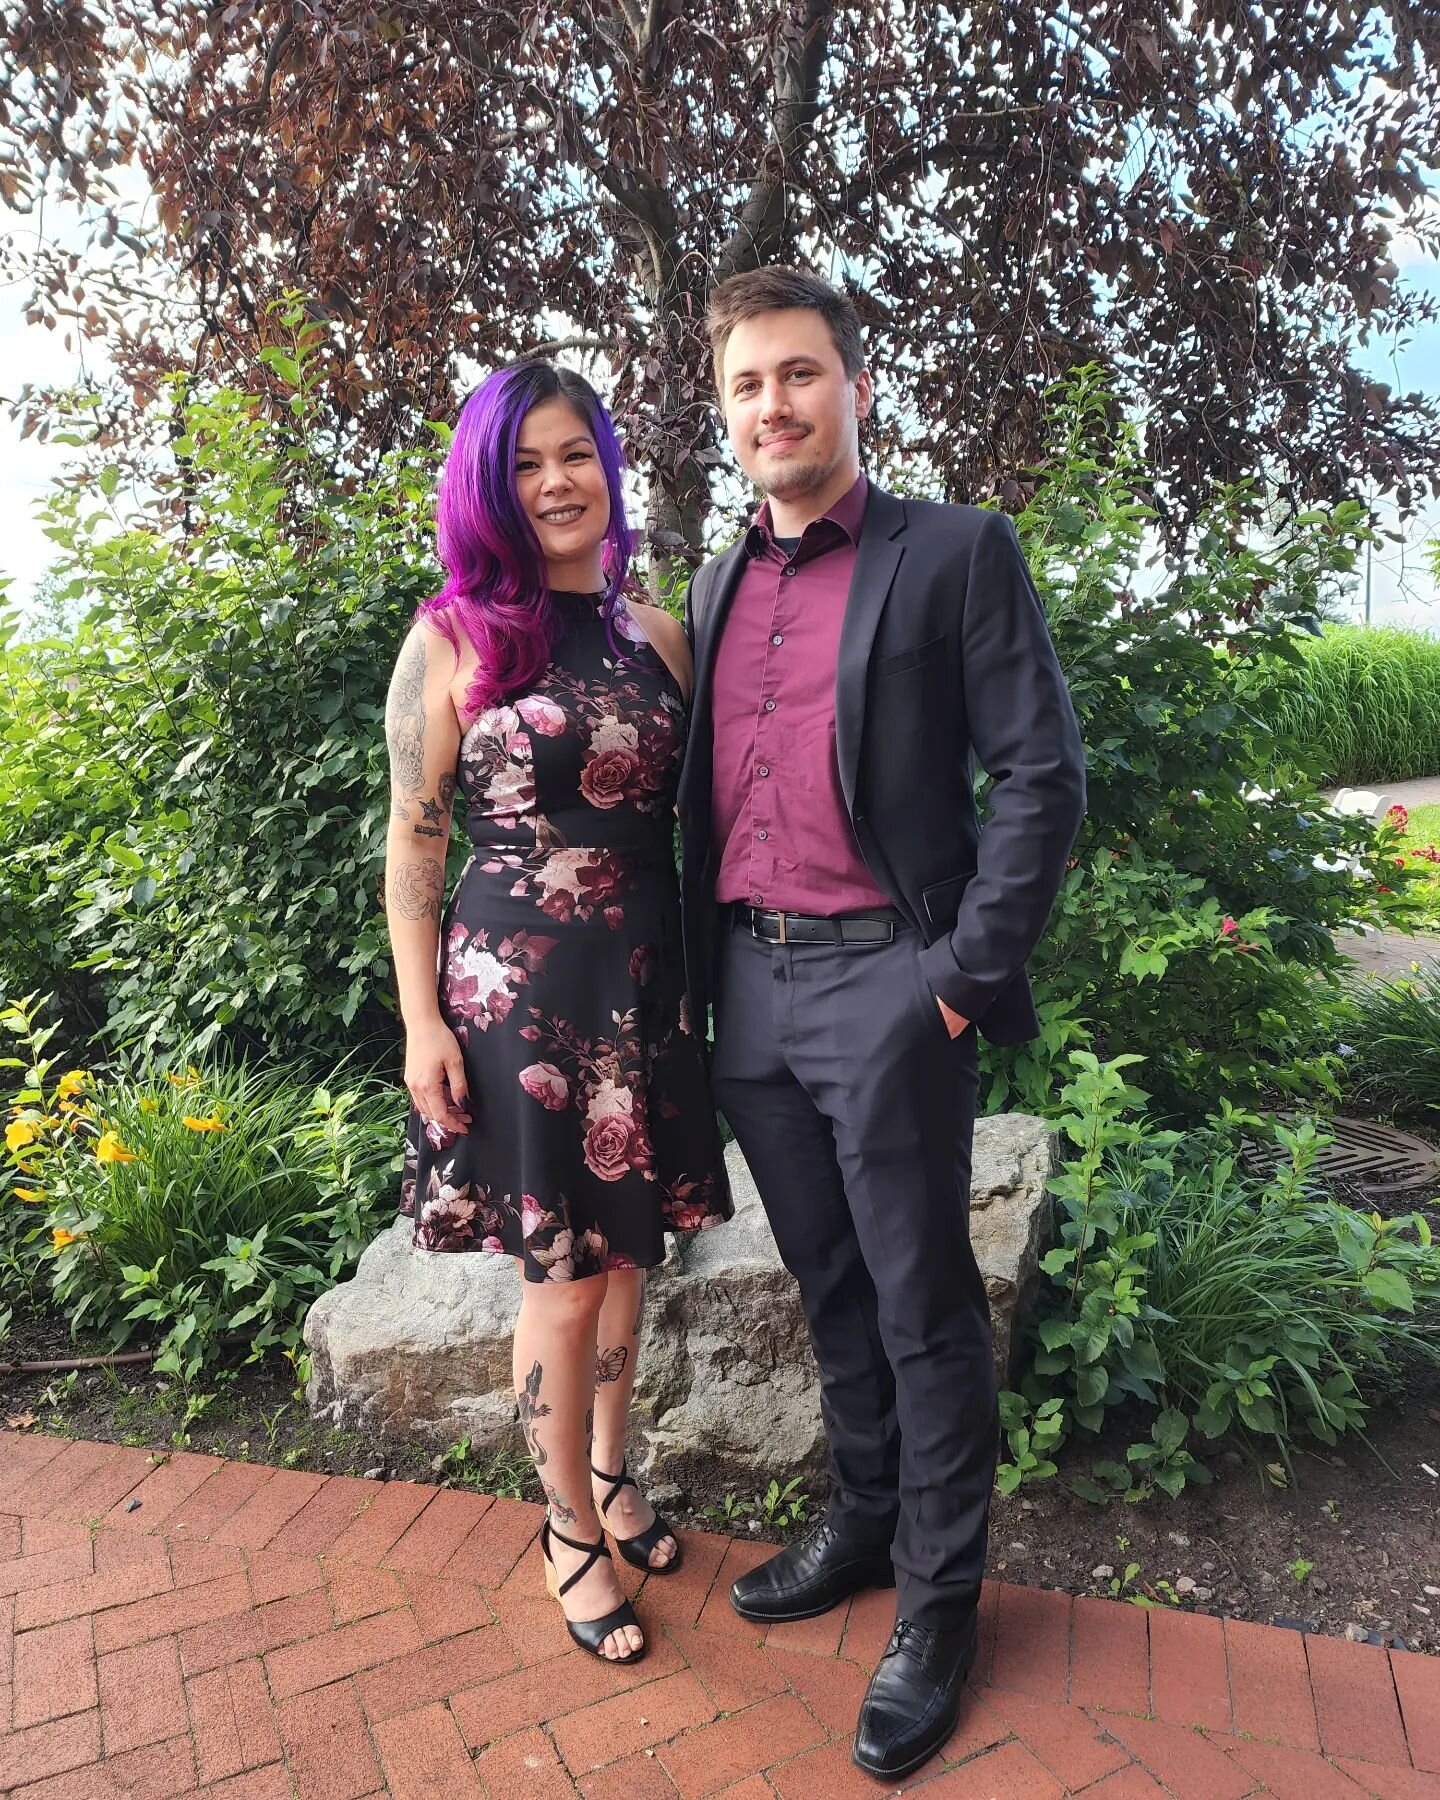 No dogs today! Wedding season with my one and only @_monotone_ 

Have a safe and wonderful Canada day weekend, remember to hydrate and keep your pets cool this long weekend. It's going to be an enrichment weekend for certain!